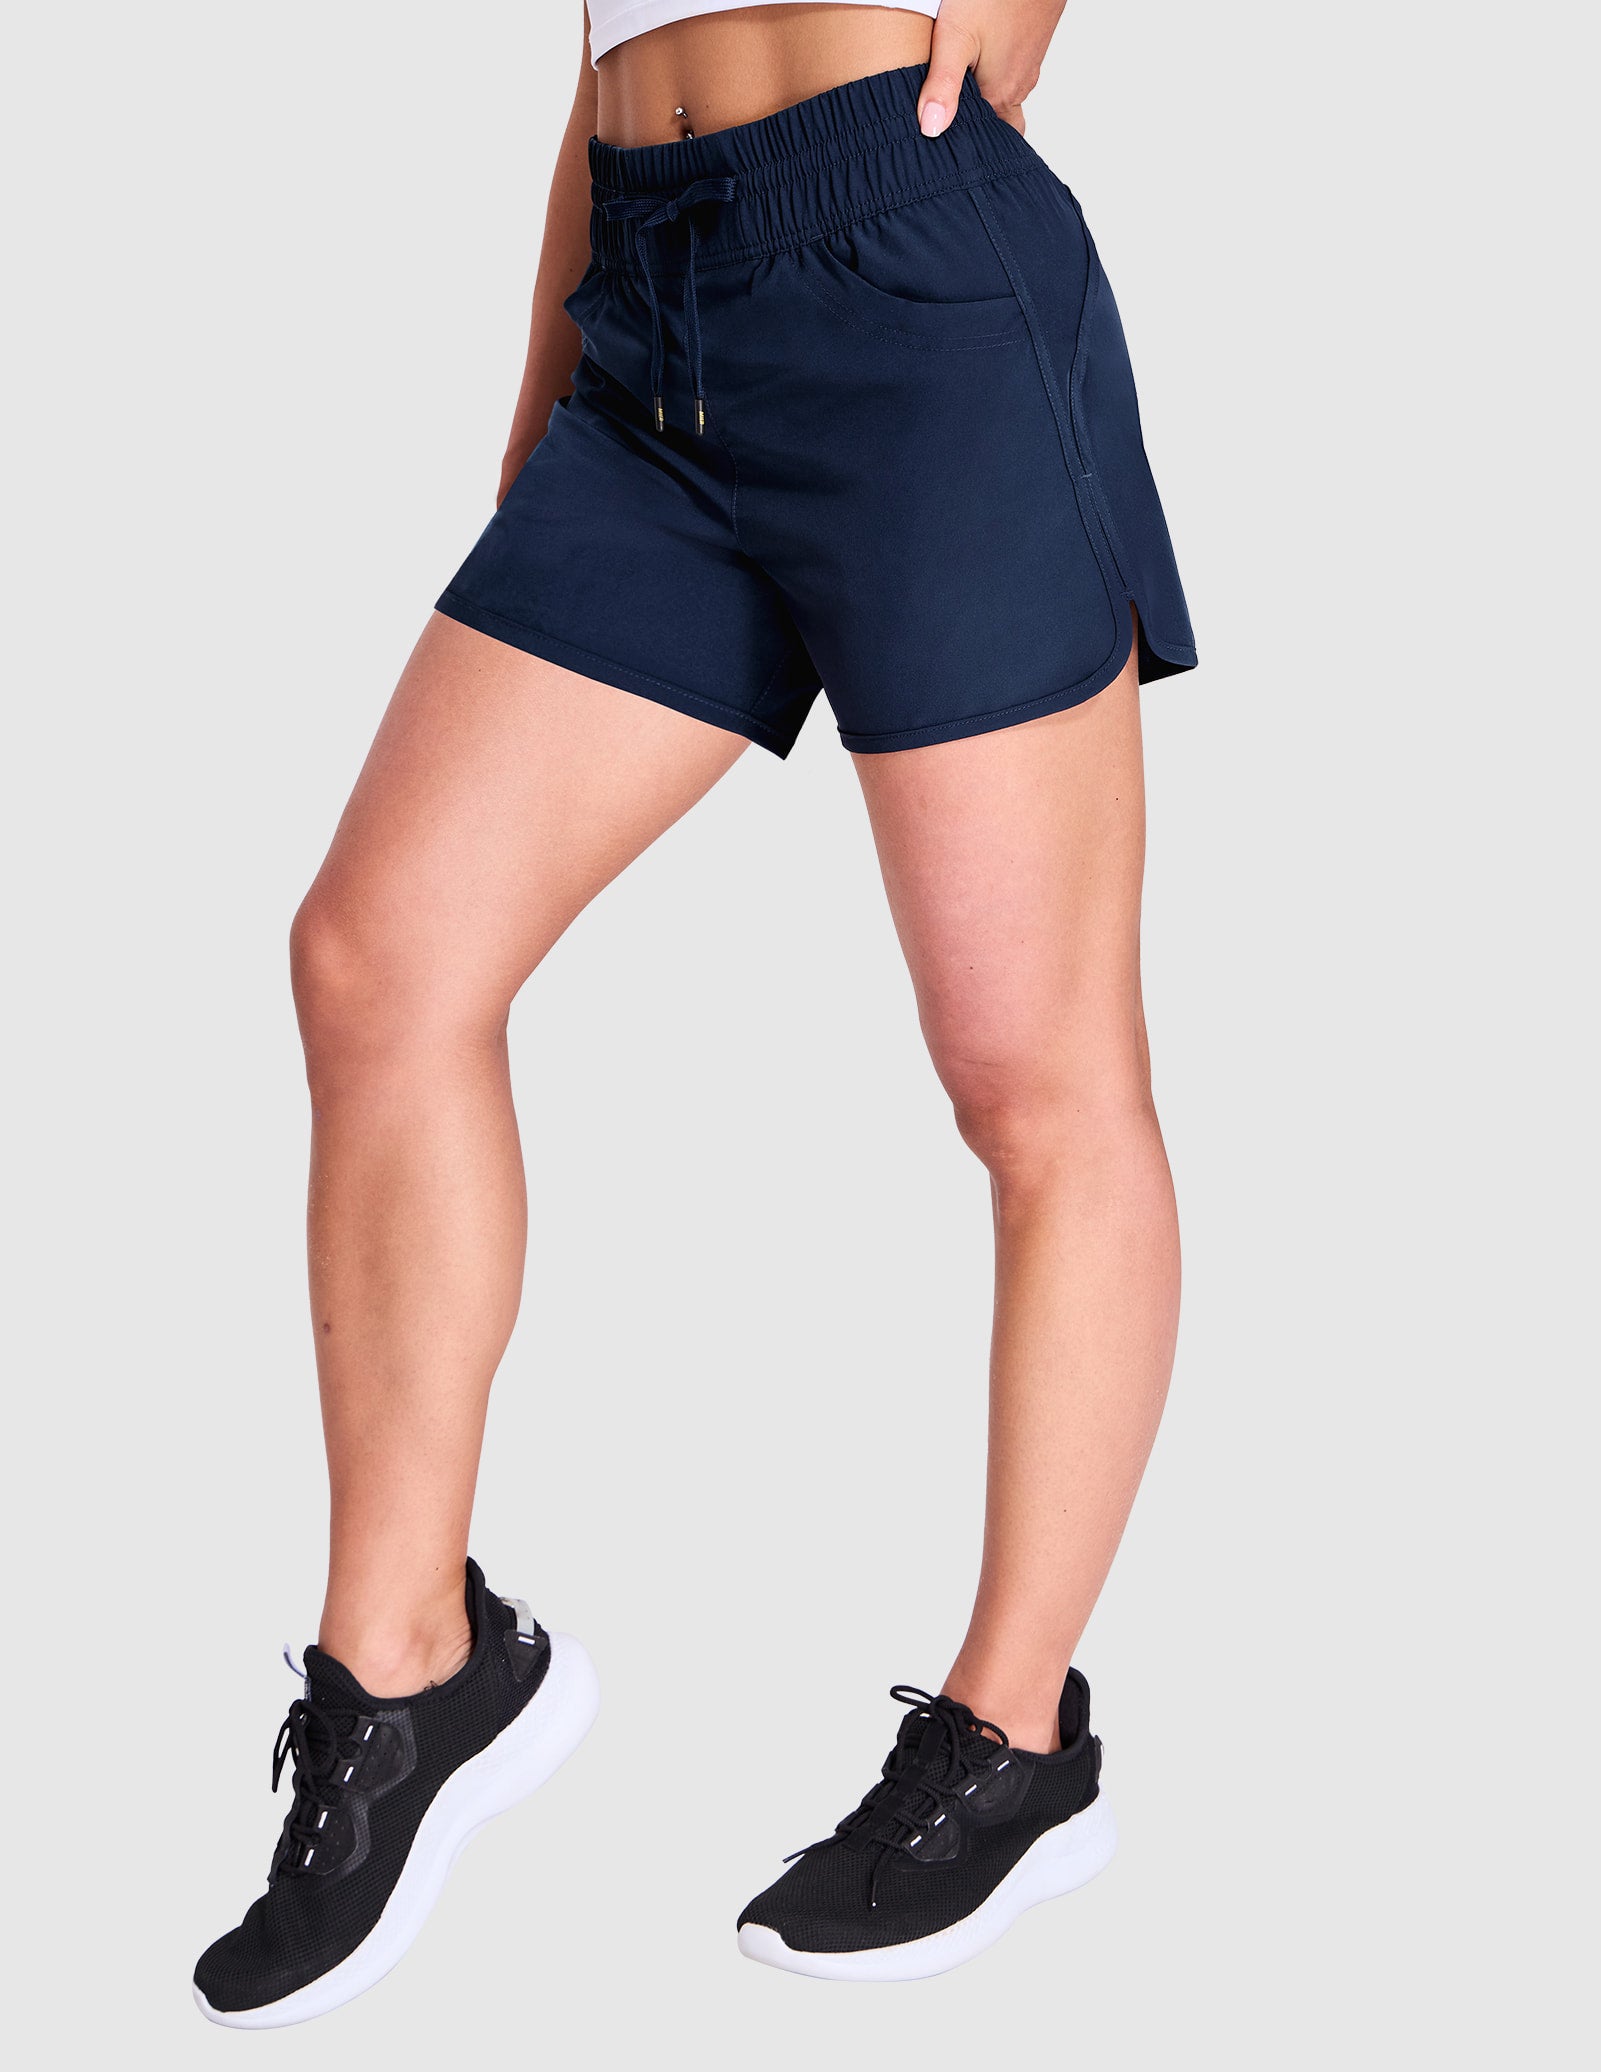 Women's Running Shorts Quick Dry with Liner Zipper Pocket